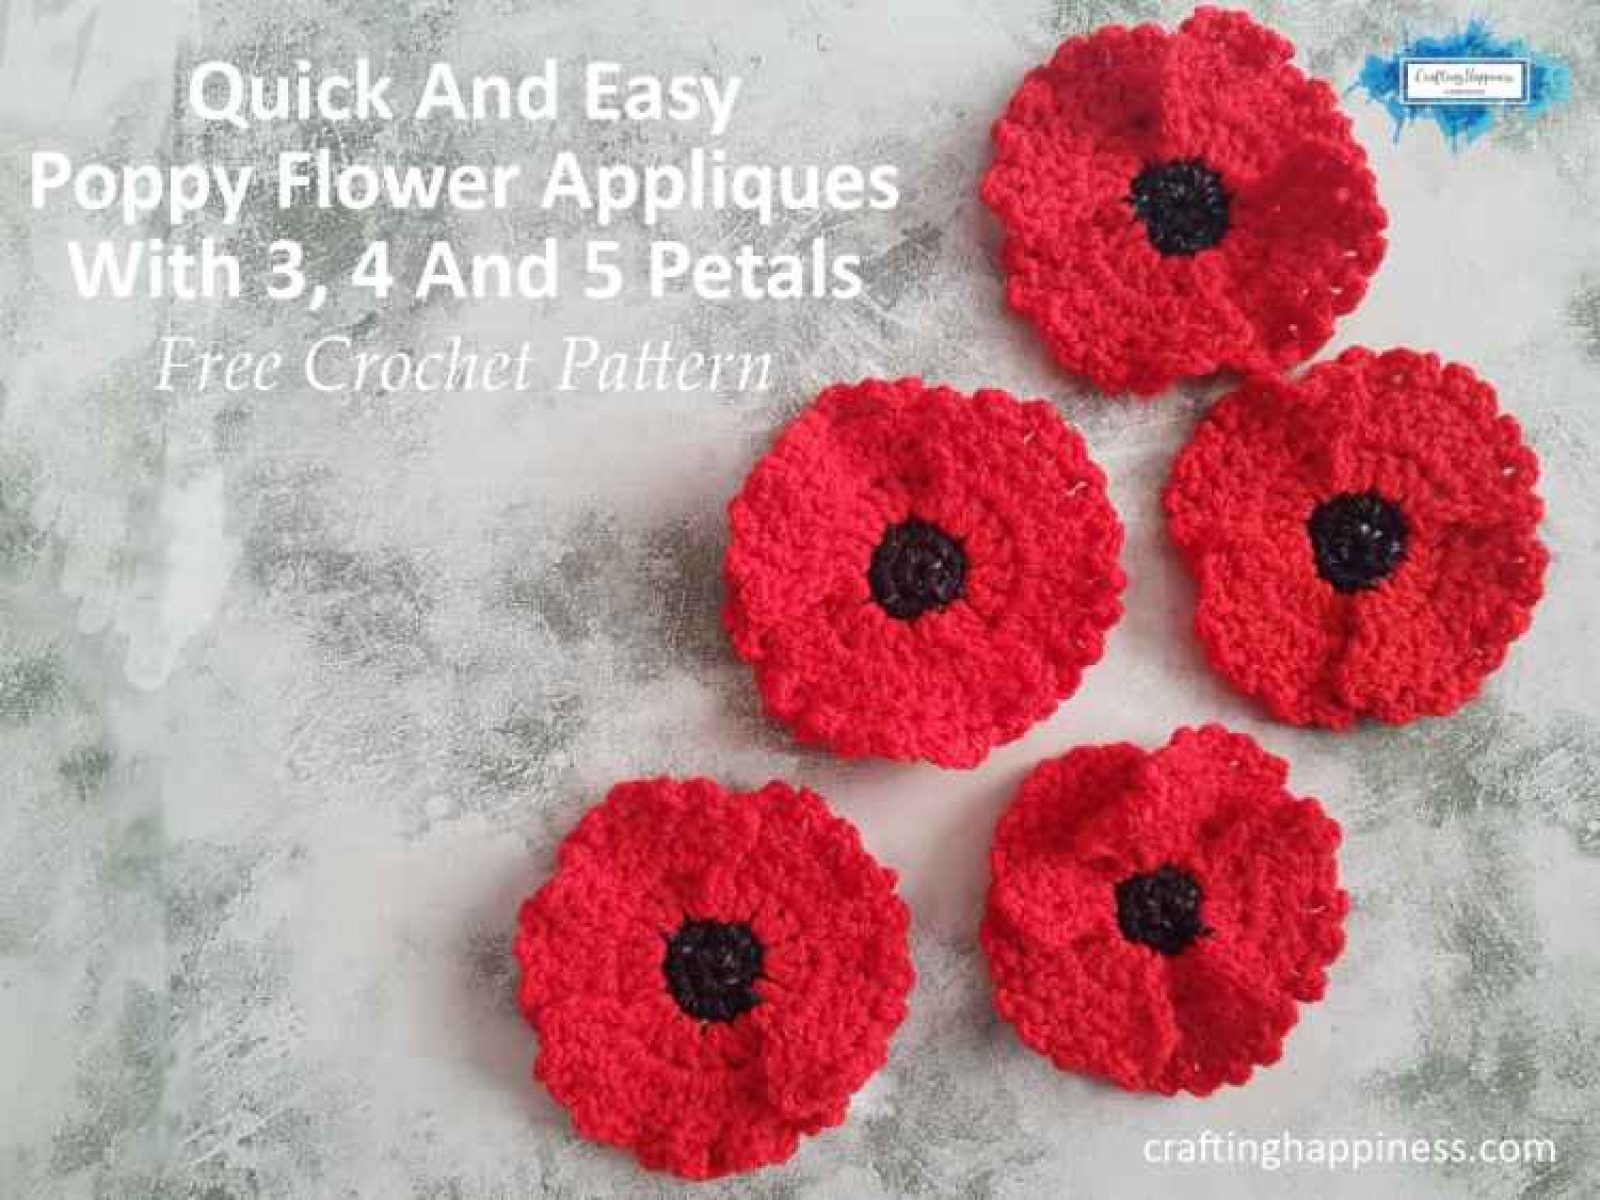 Quick & Easy Crochet Poppy Flower Applique With 3, 4 & 5 Petals Free Pattern by Crafting Happiness Facebook Poster